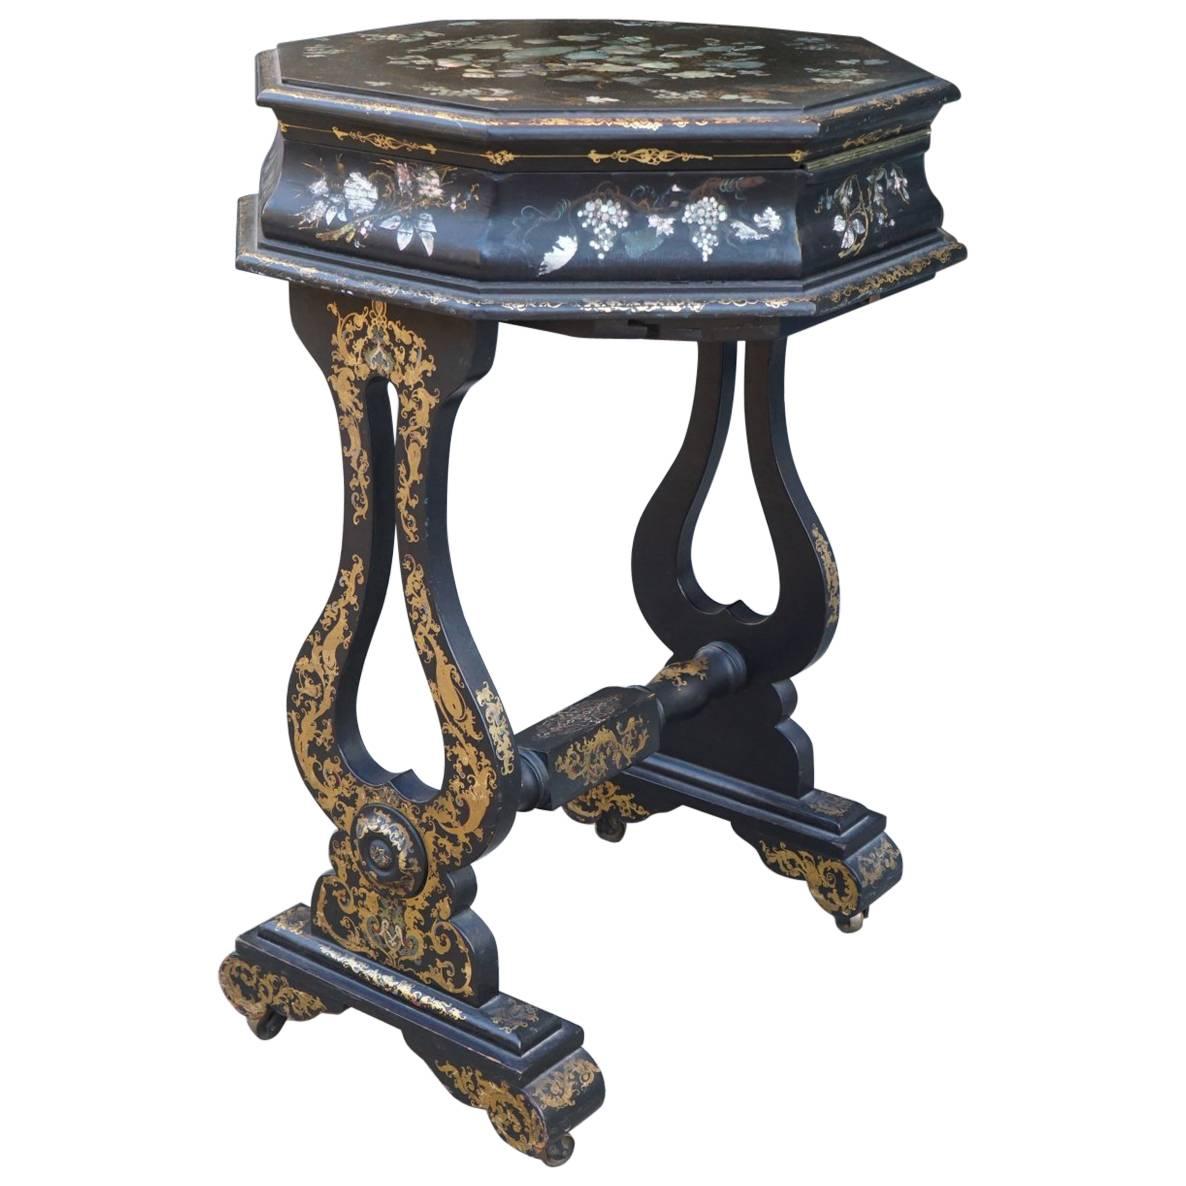 Victorian Papier Mâché and Mother-of-Pearl Inlayed Work Table For Sale